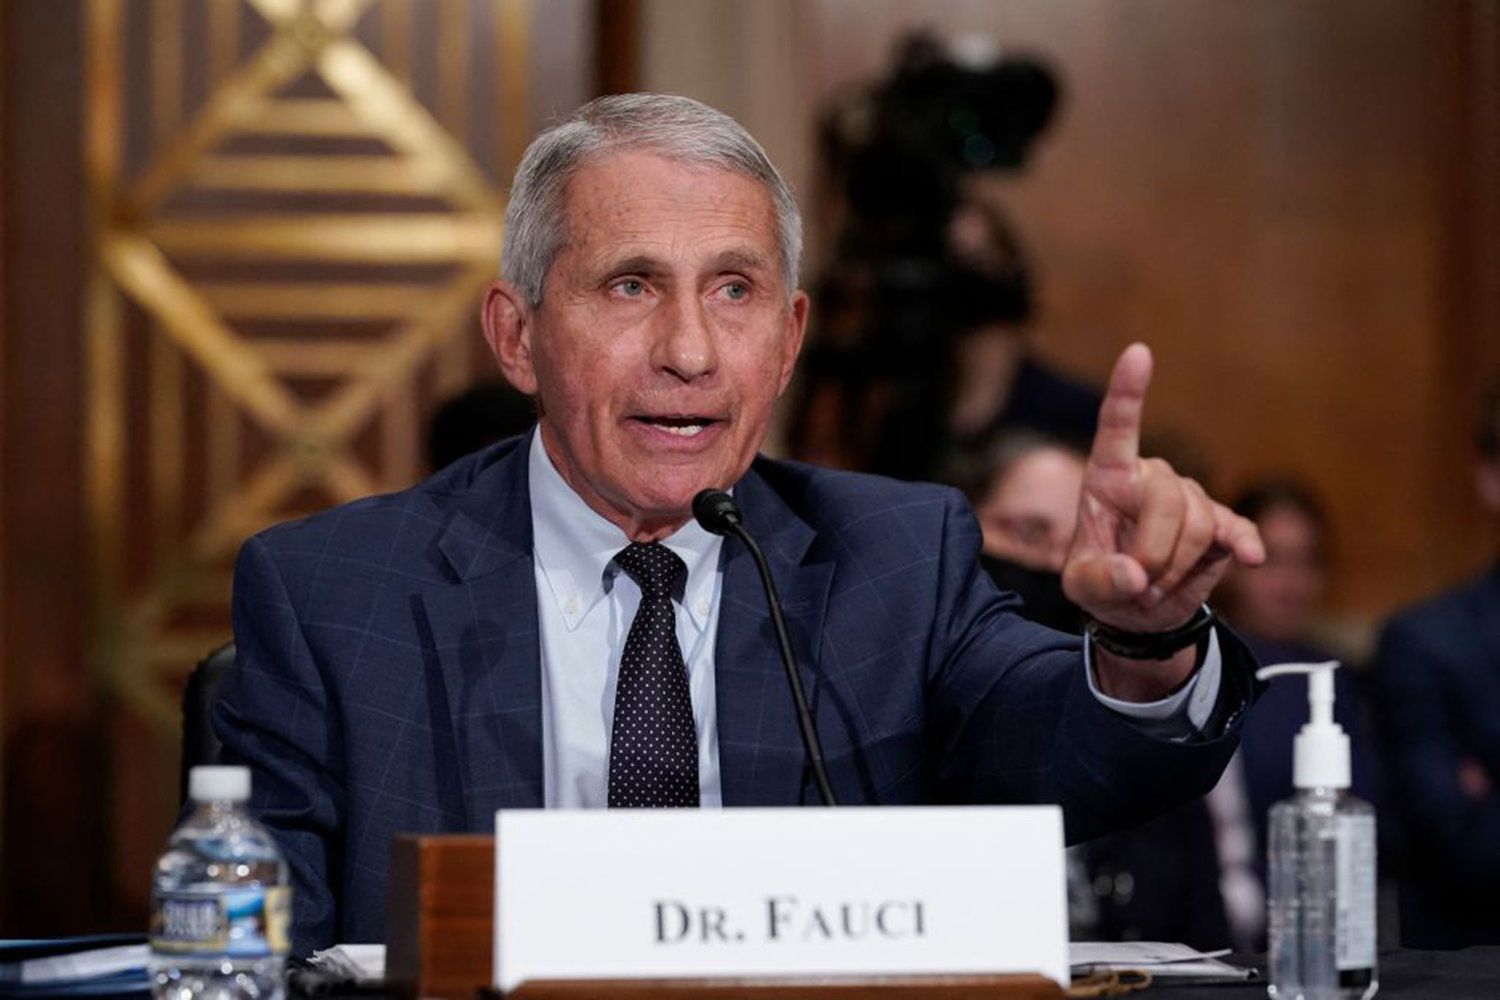 Dr. Anthony Fauci, director of the National Institute of Allergy and Infectious Diseases, responds to questions by Sen. Rand Paul, R-Ky., during the Senate Health, Education, Labor, and Pensions Committee hearing on Capitol Hill in Washington, D.C., on July 20, 2021. (J. Scott Applewhite/Pool/AFP via Getty Images/TNS)